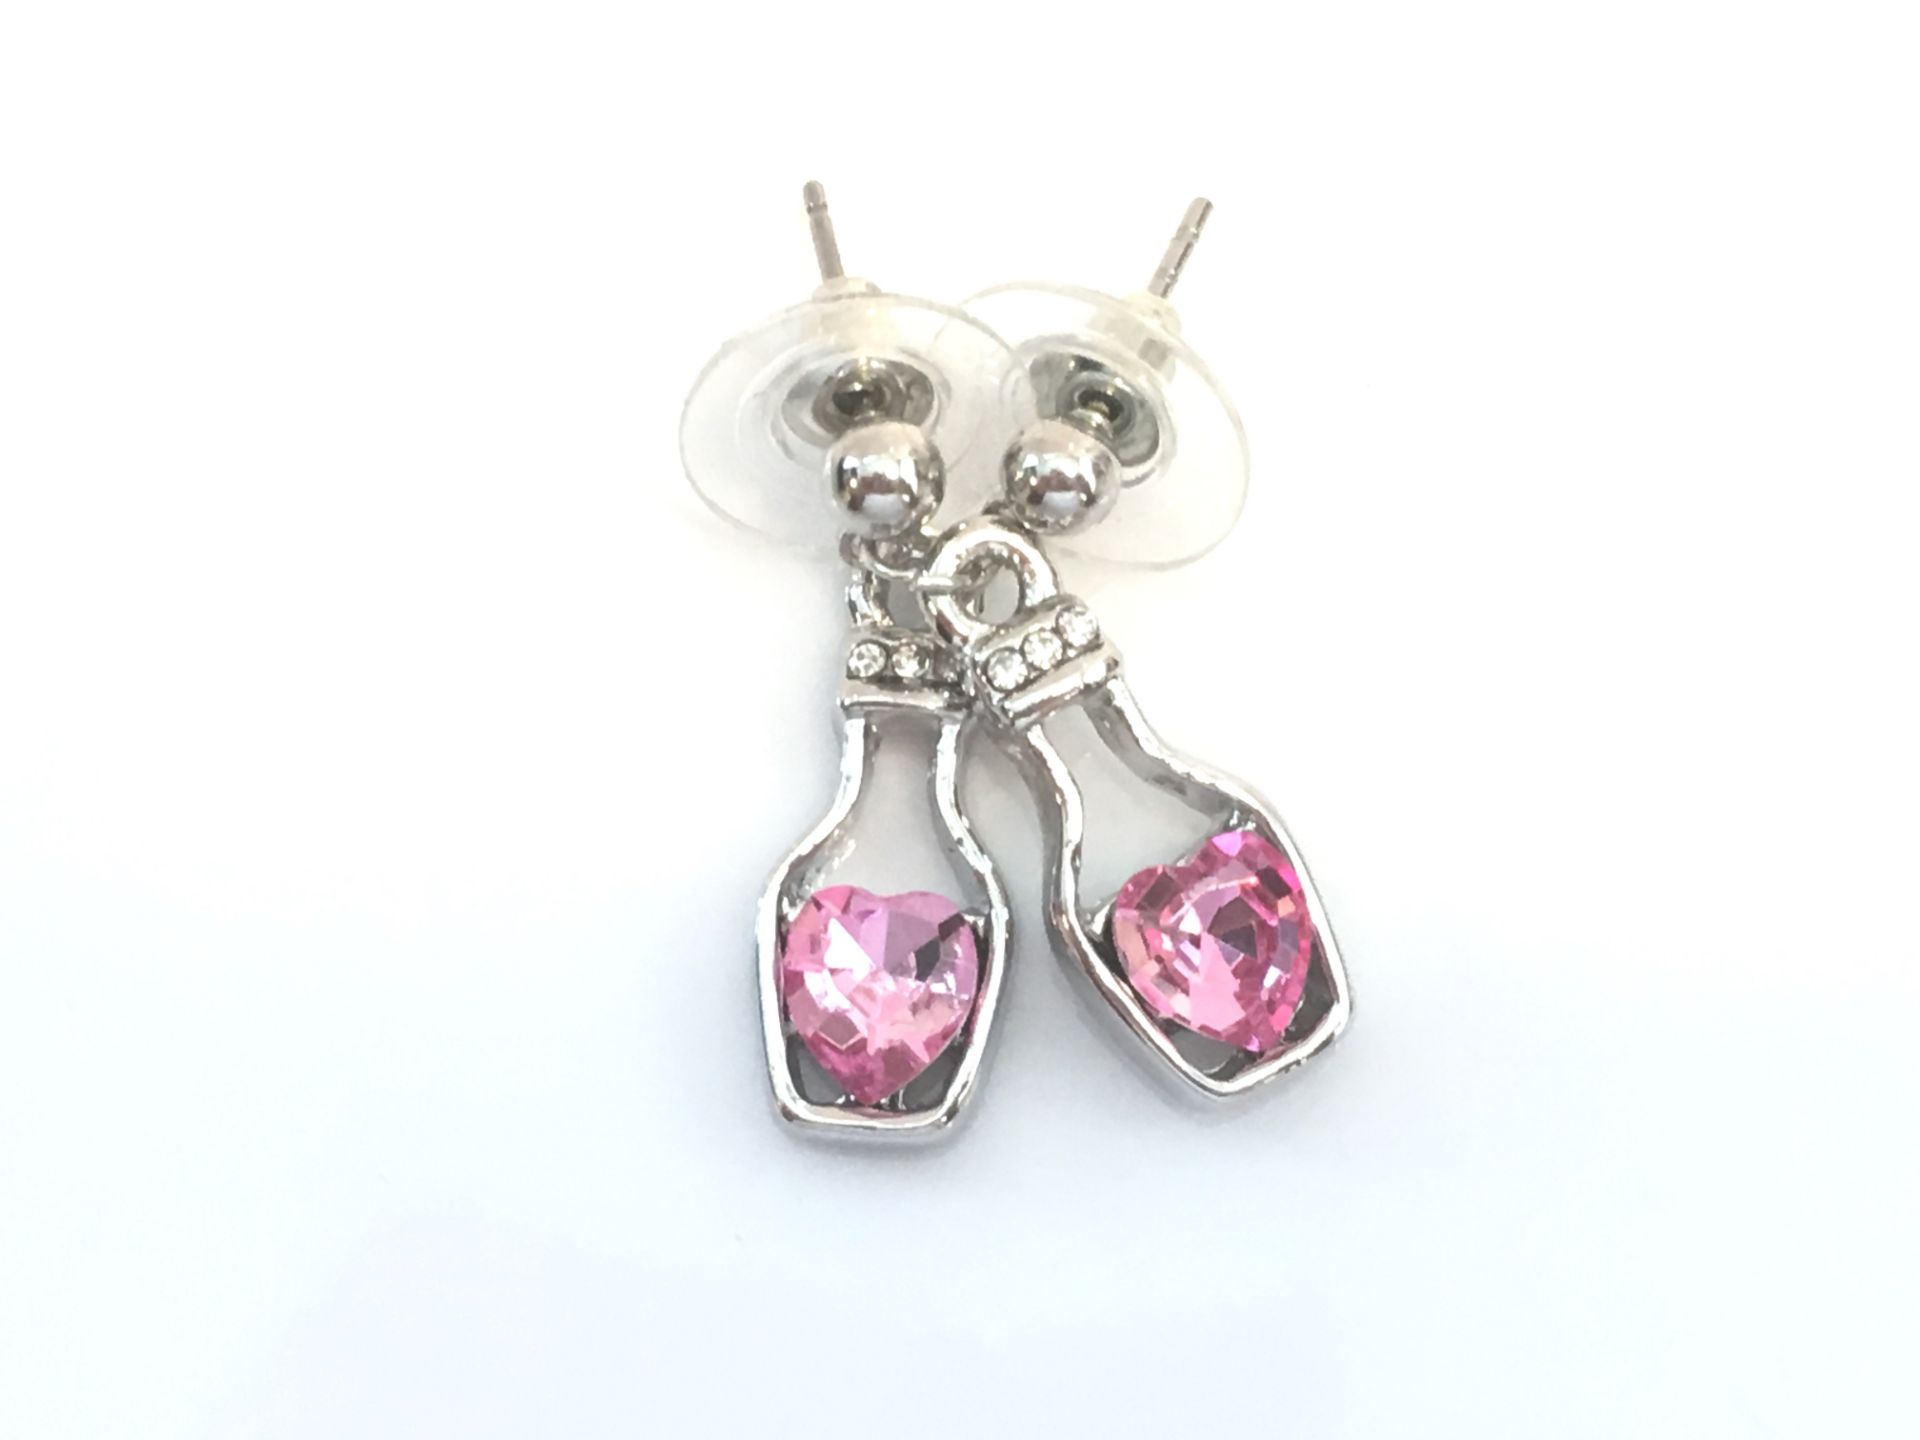 PRETTY SILVER BOTTLE EARRING AND NECKLACE SET PINK SWAROVSKI CRYSTAL - Image 4 of 4